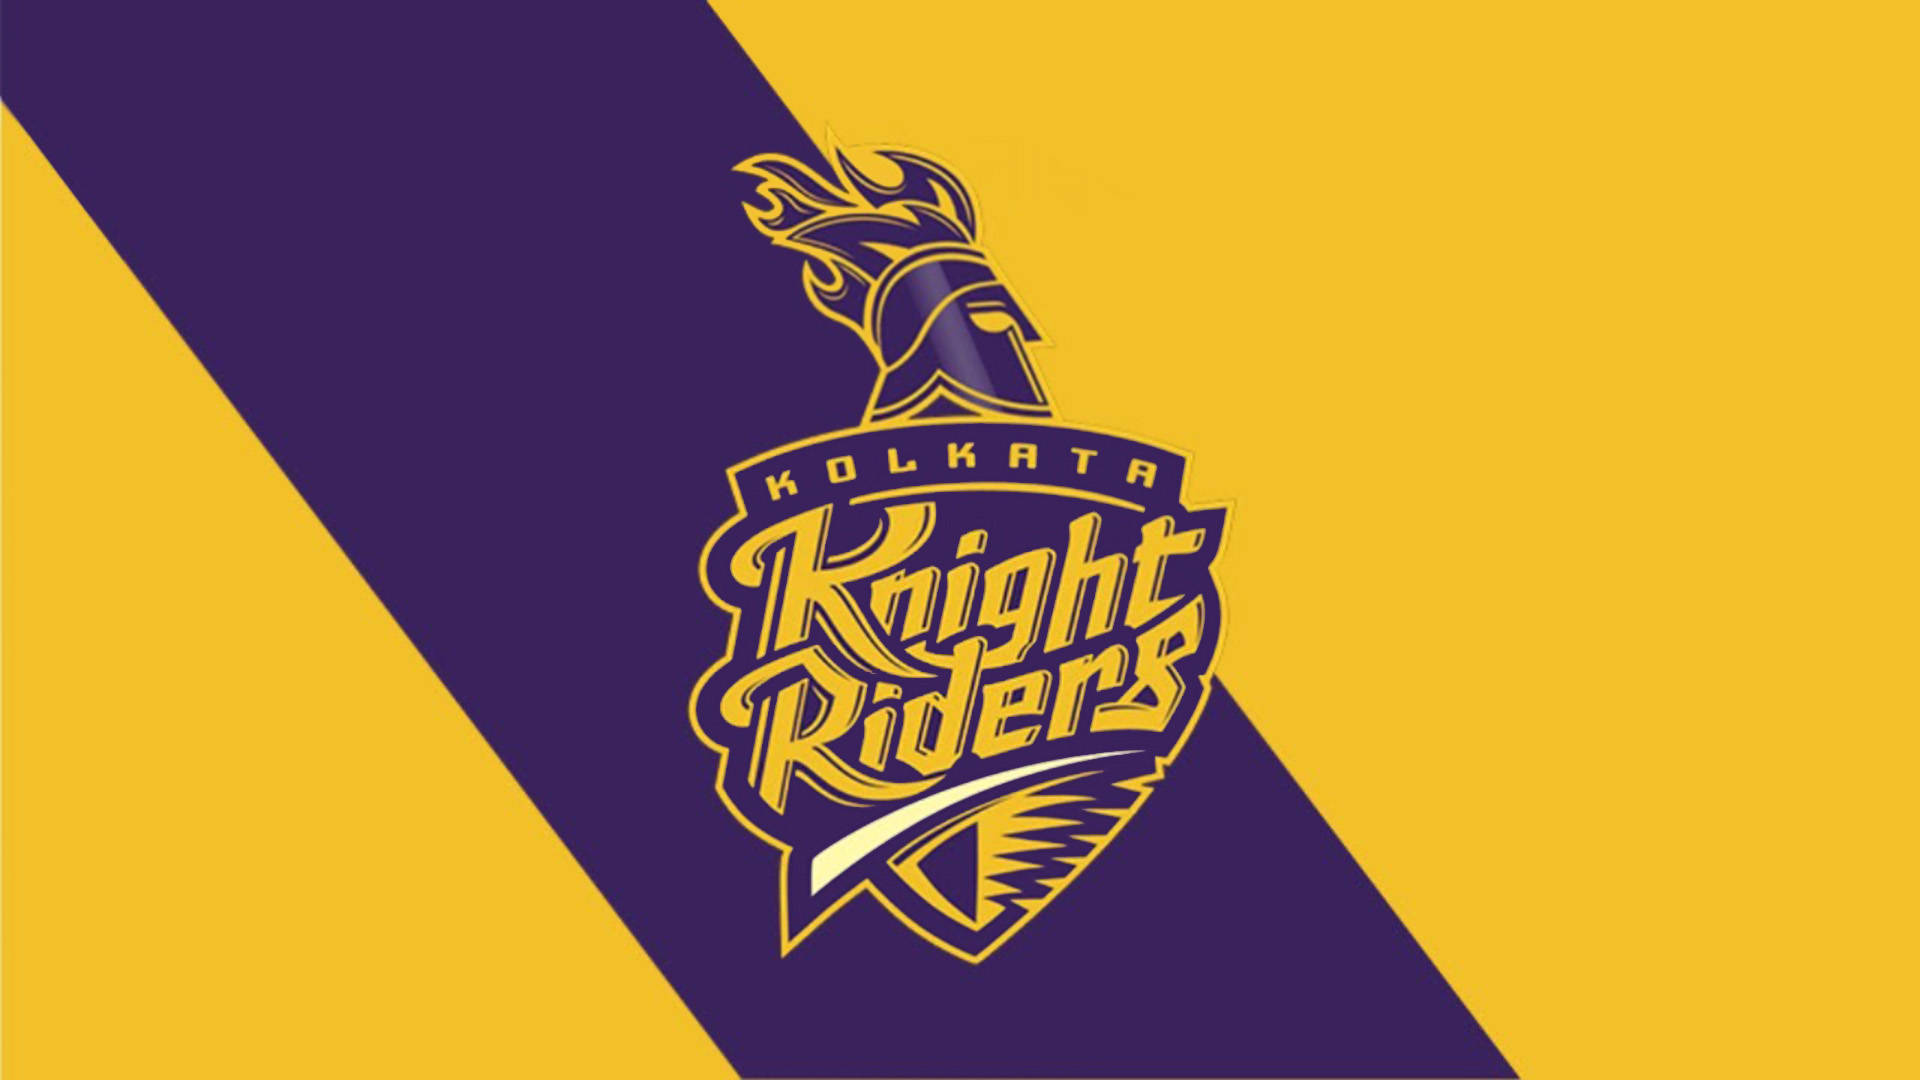 Wallpaper 3 | Kolkata knight riders, Photo background images, Background  images